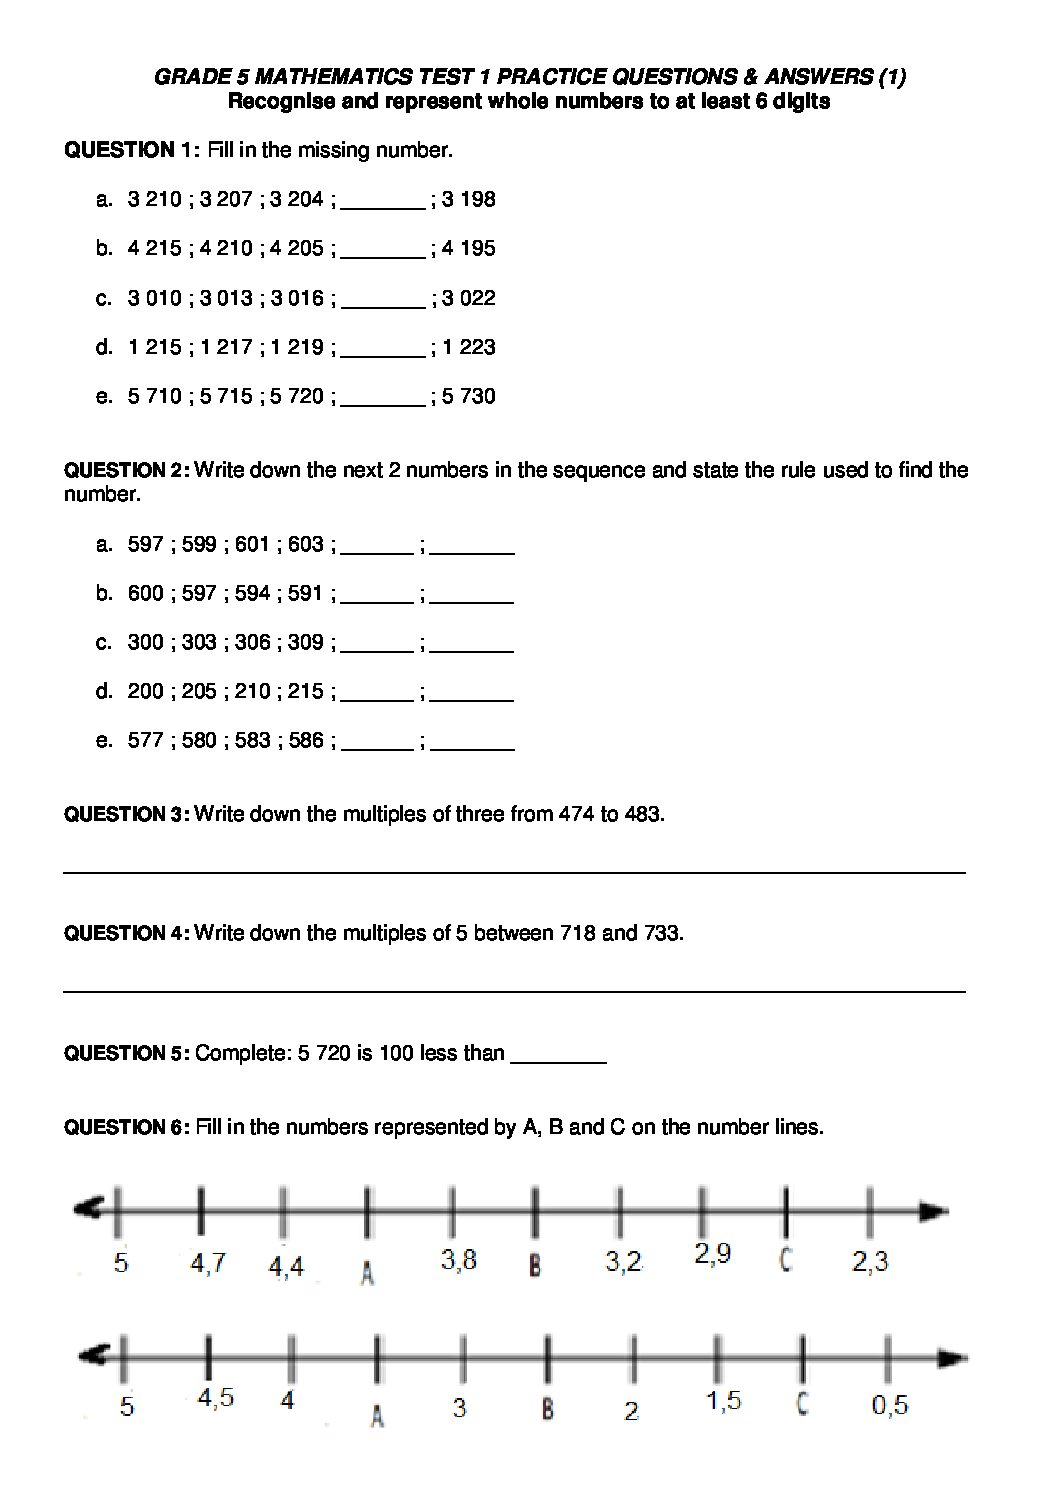 Grade 5 MATHEMATICS TERM 1 PRACTICE QUESTIONS ANSWERS 1 Preview 2 Pdf 